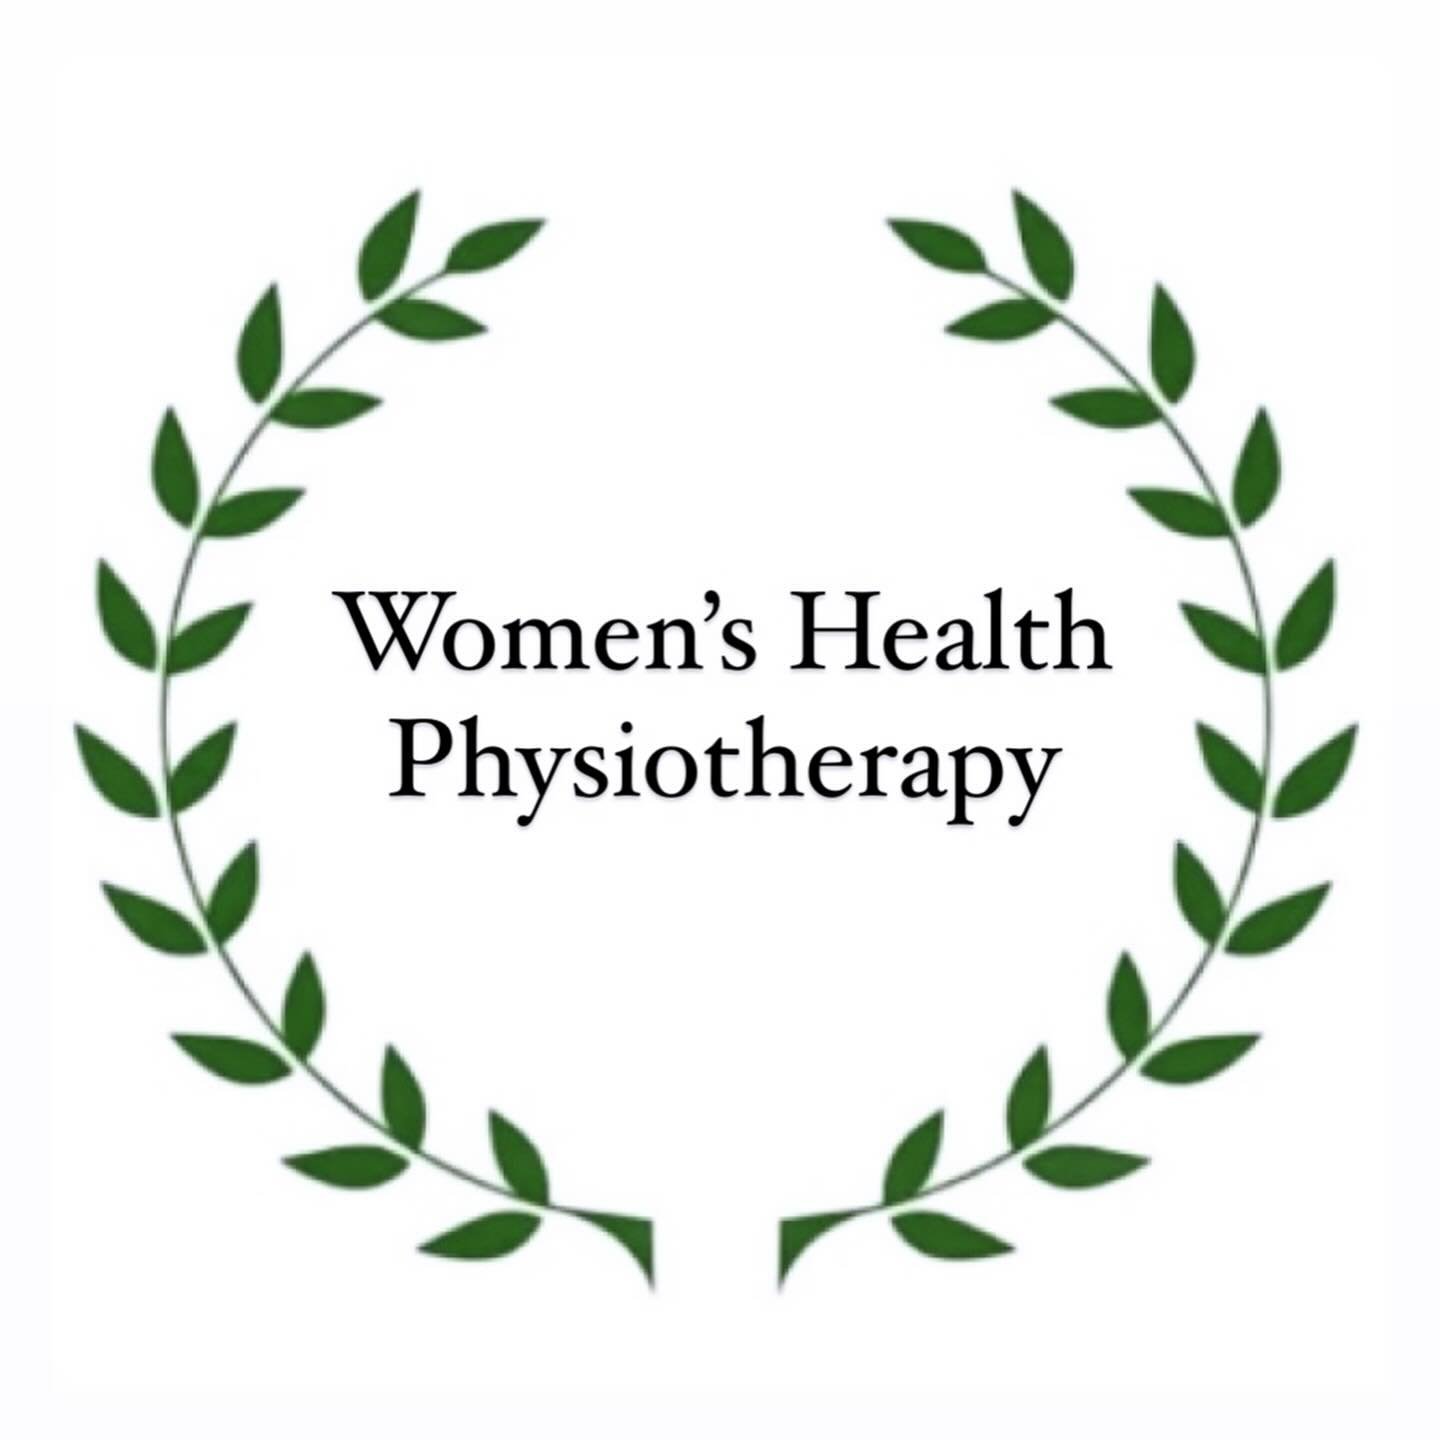 🌿 WOMEN&rsquo;S HEALTH PHYSIOTHERAPY 🌿

We are delighted to announce that we are now offering Women&rsquo;s Health Physiotherapy assessment and treatment from our clinic in Langham 🙌

Women&rsquo;s health physiotherapy focuses on addressing and ma